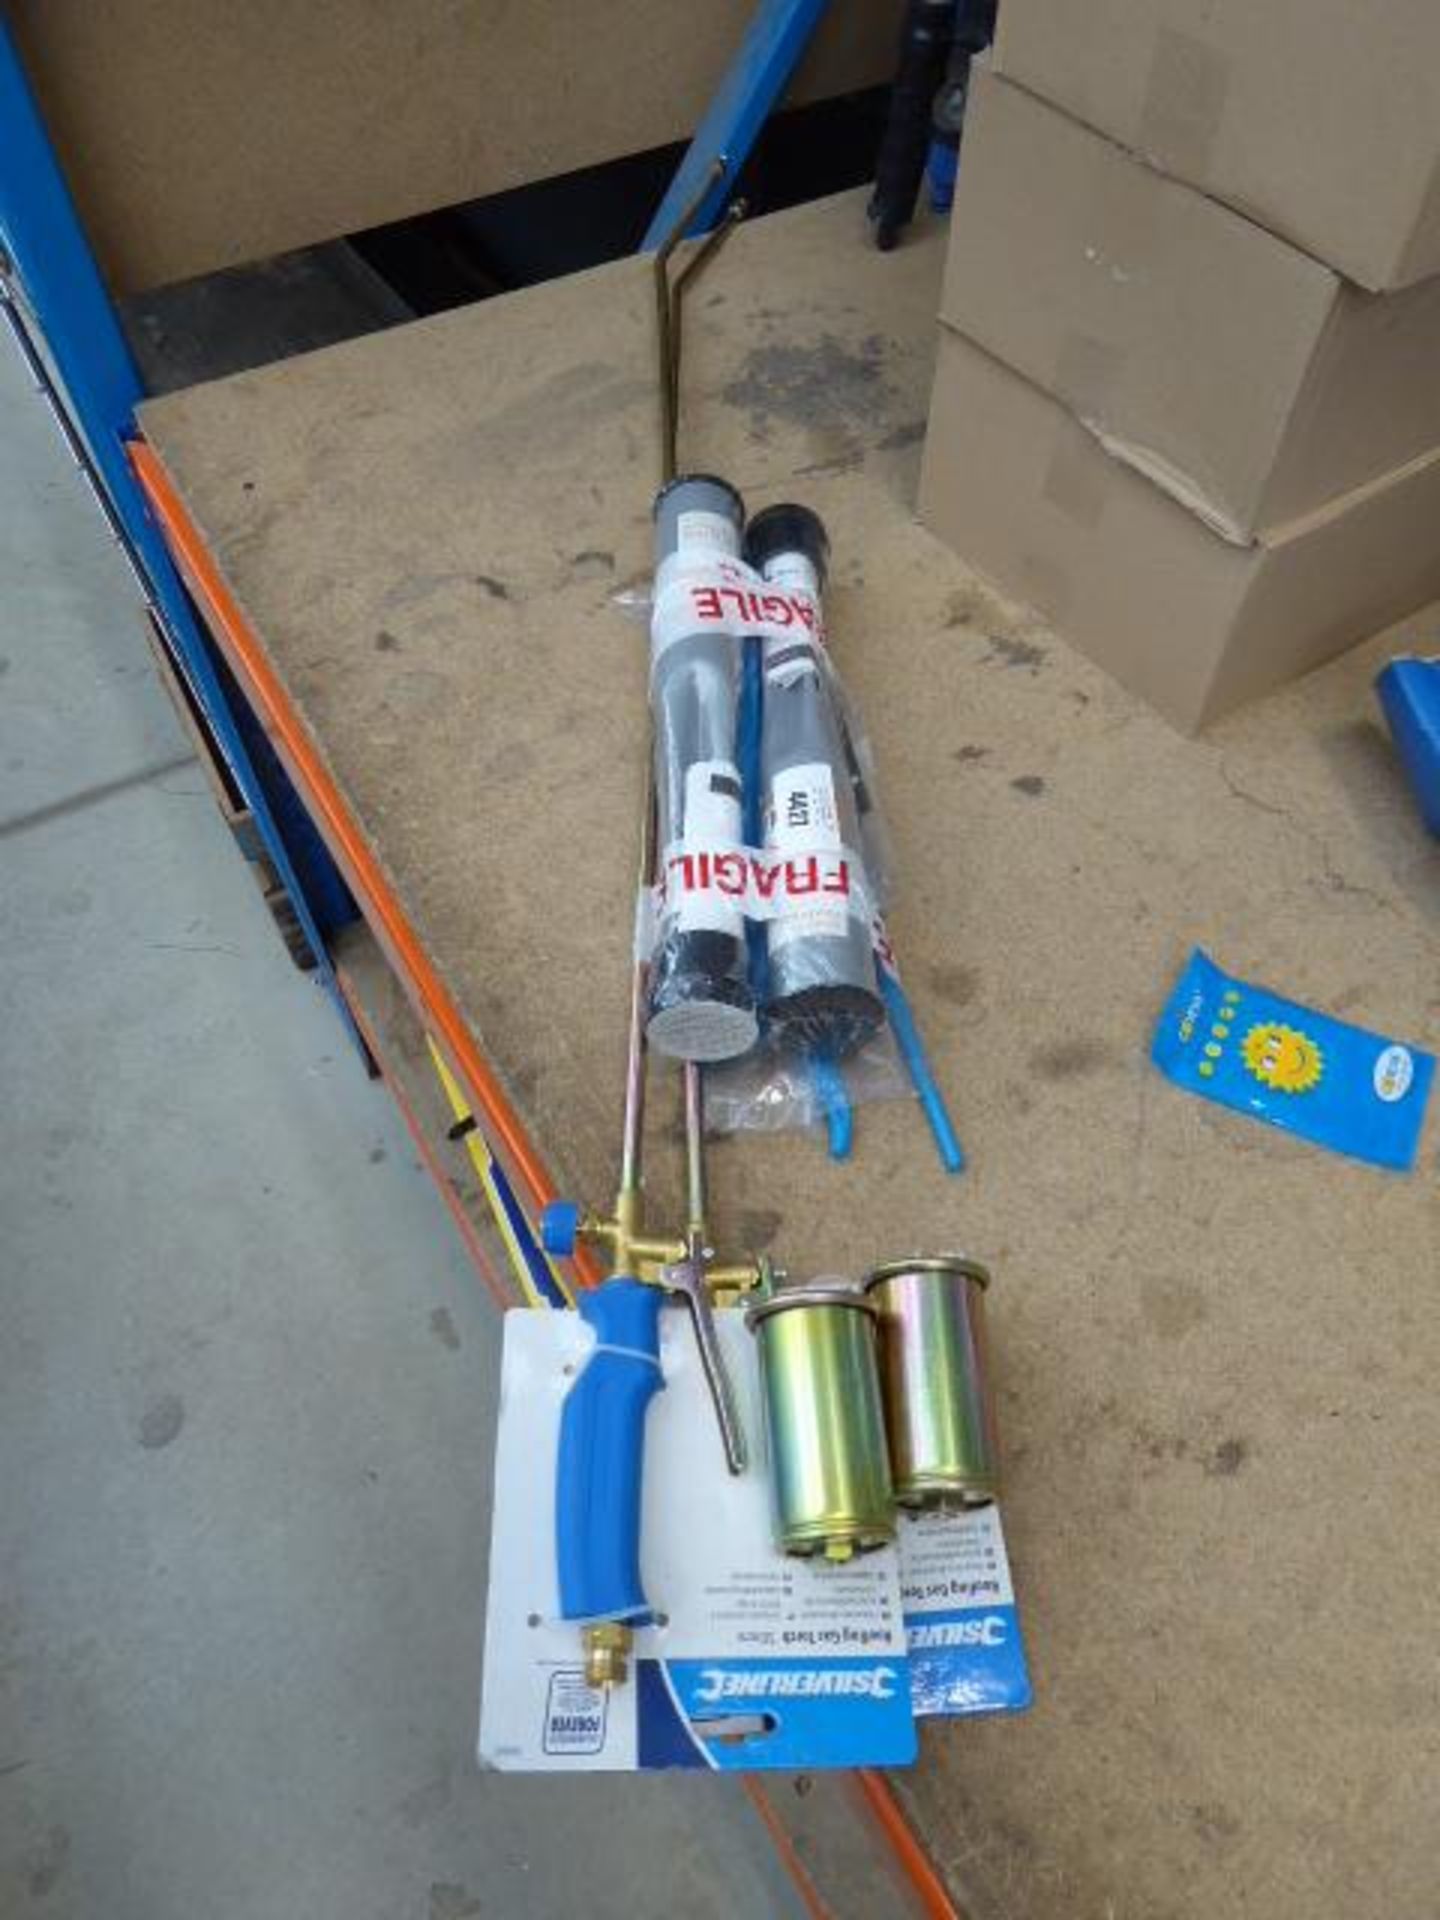 2 roofing gas torches, set of pliers and 2 rotaryclothes line spikes